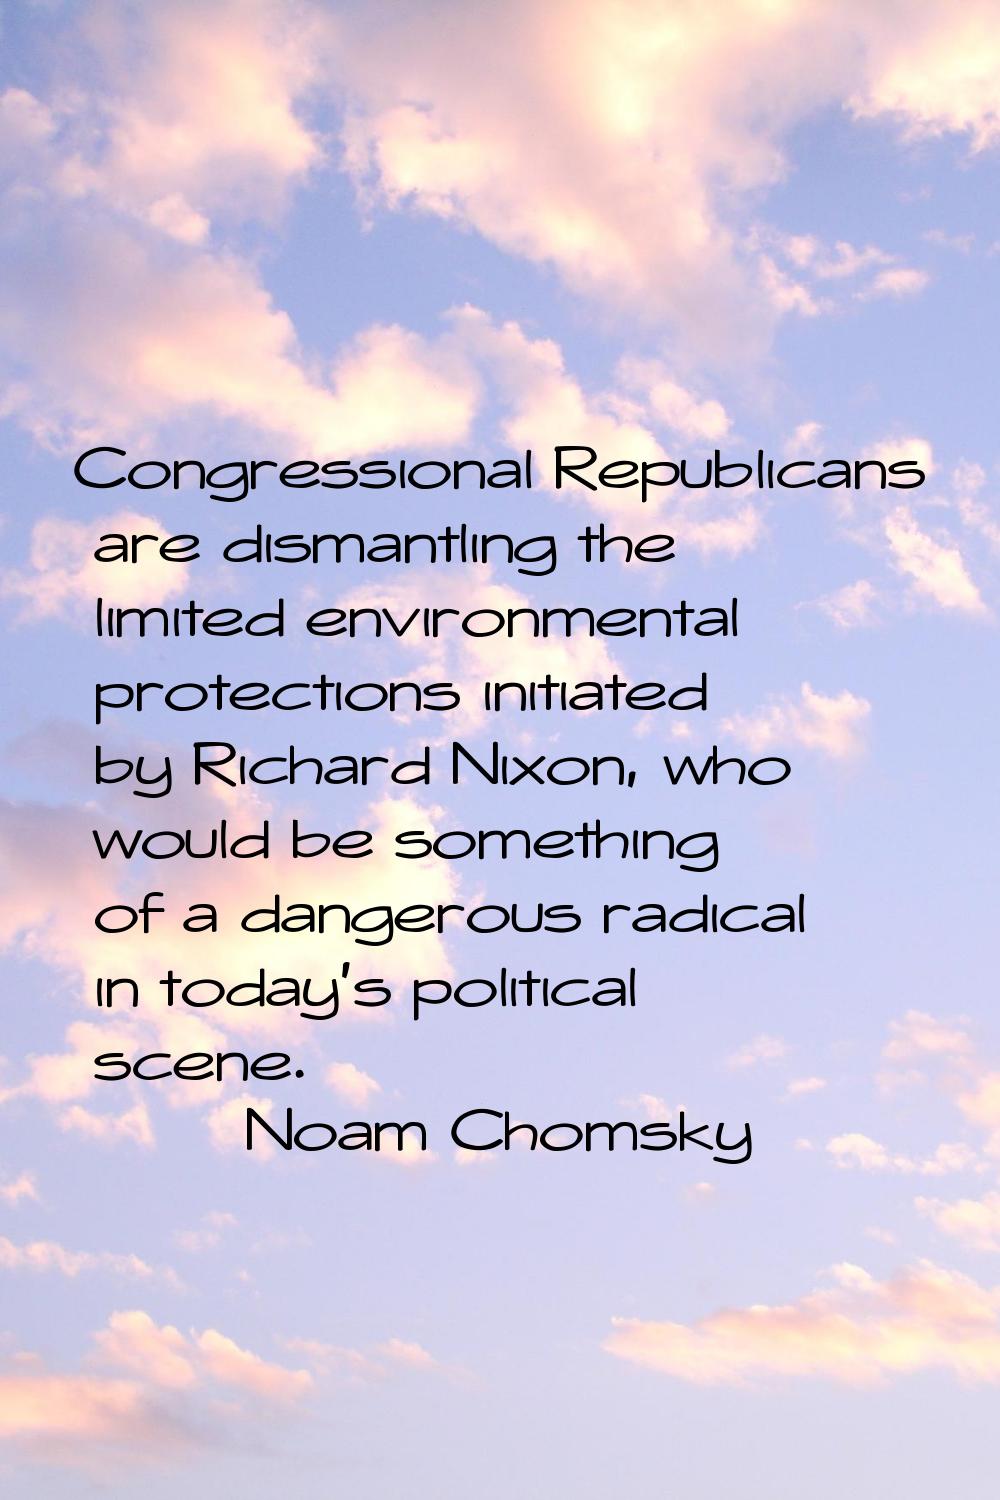 Congressional Republicans are dismantling the limited environmental protections initiated by Richar